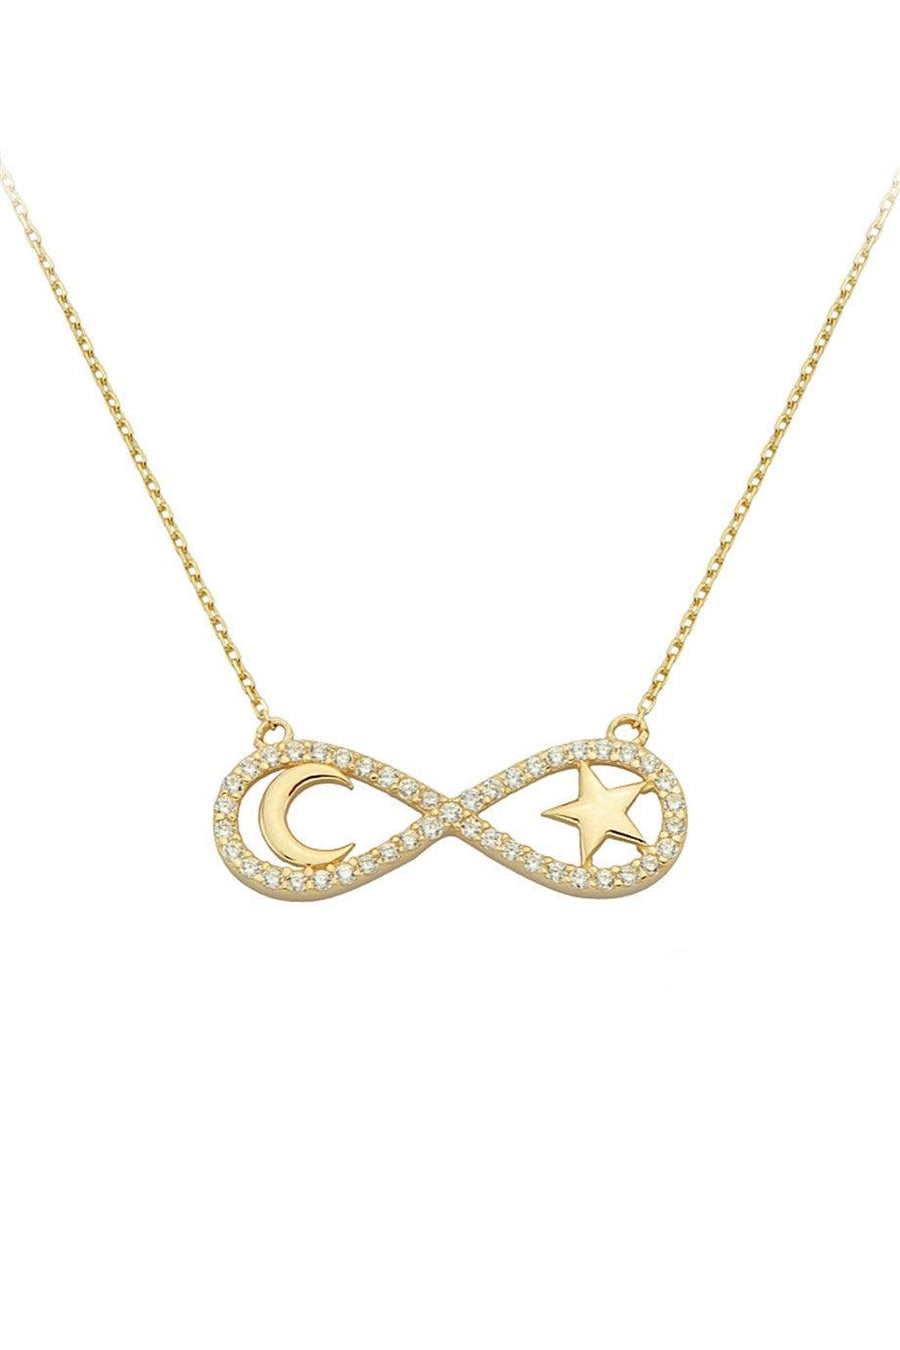 Gold Infinity Moon Star Necklace